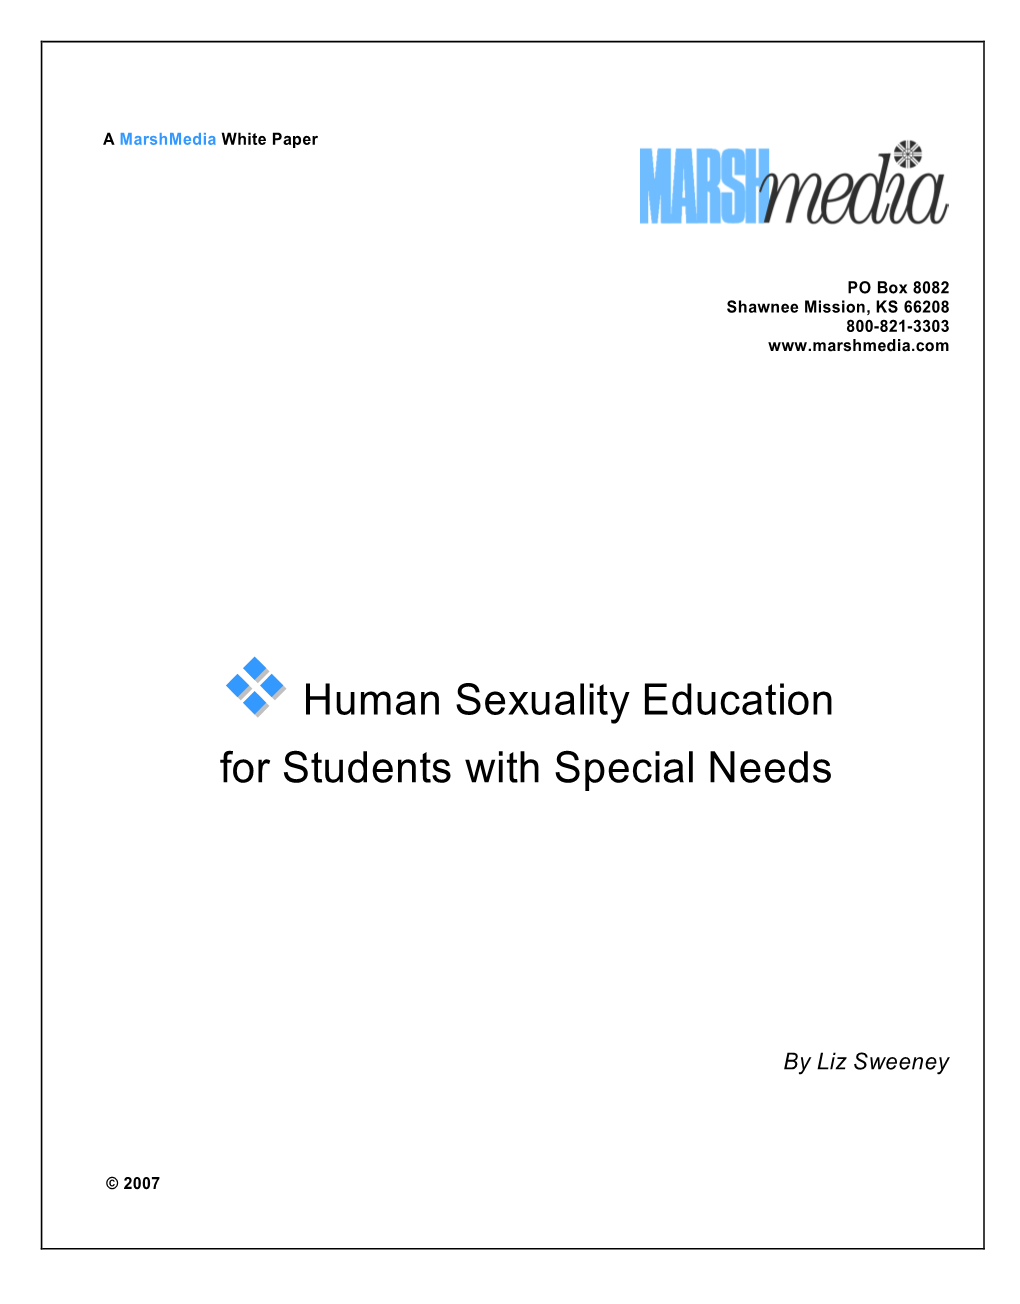 Human Sexuality Education for Students with Special Needs